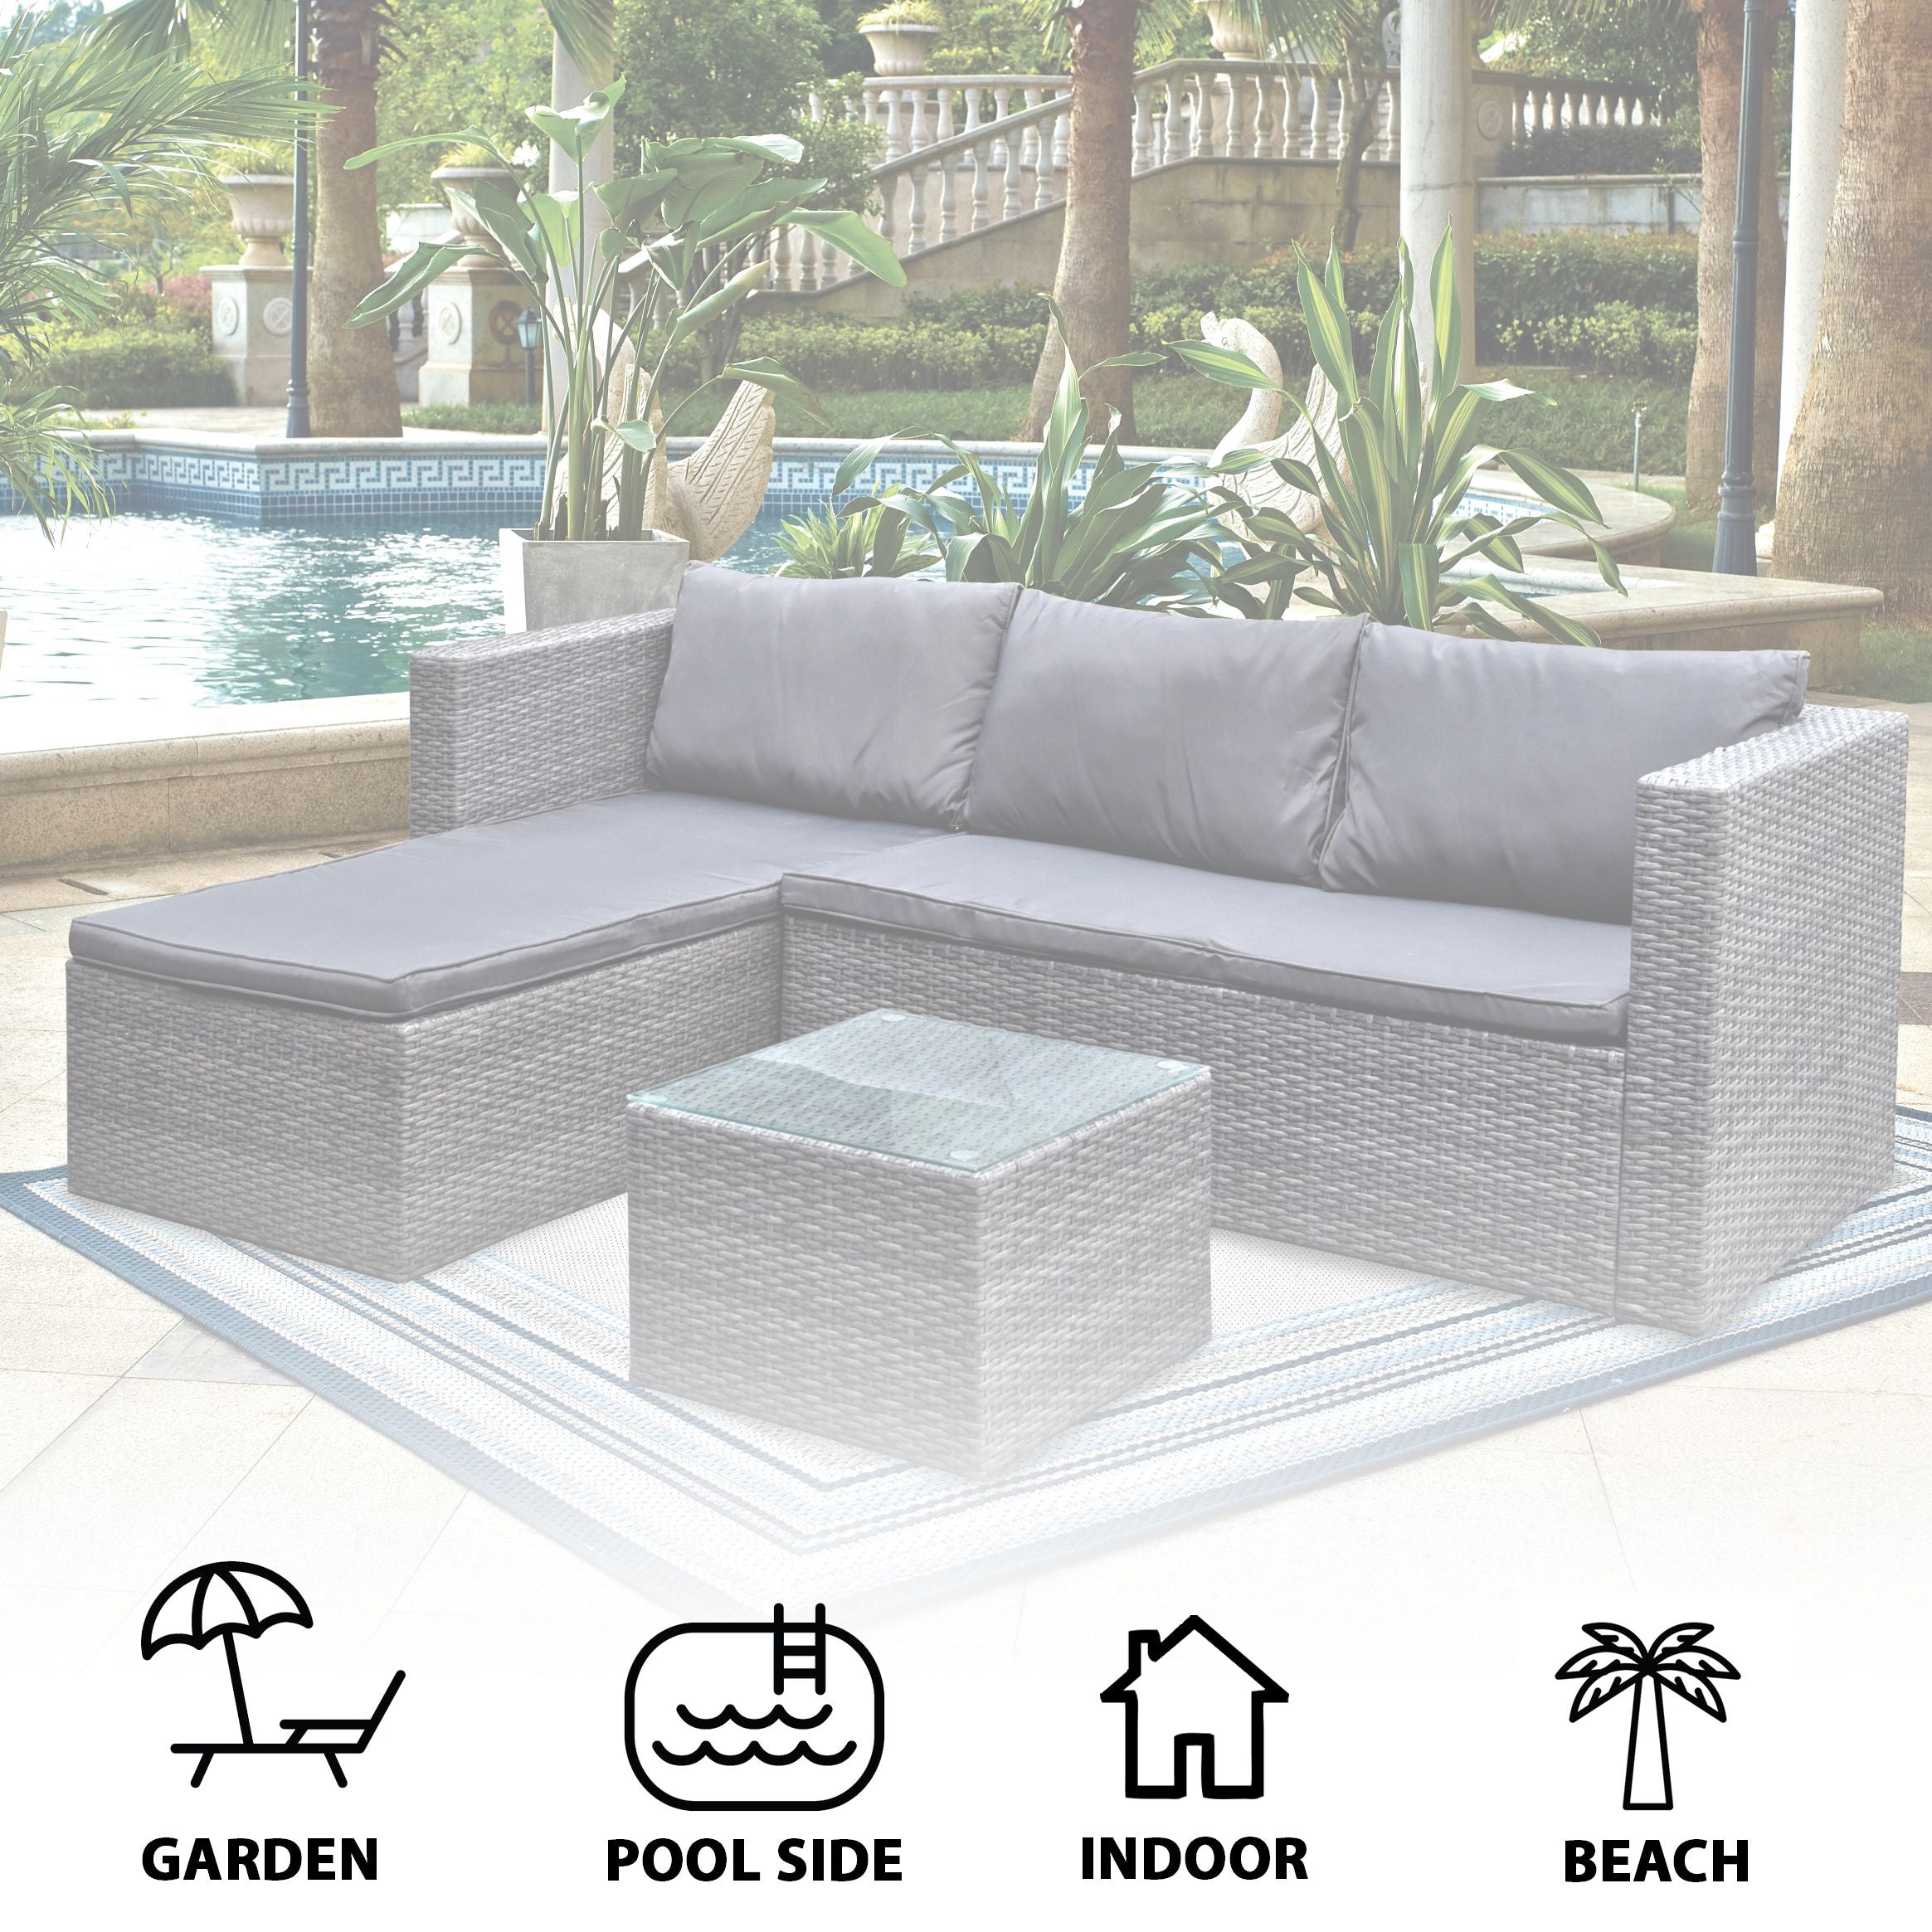 6 Seater Rattan Corner Sofa With Chaise & Table Garden Furniture Set